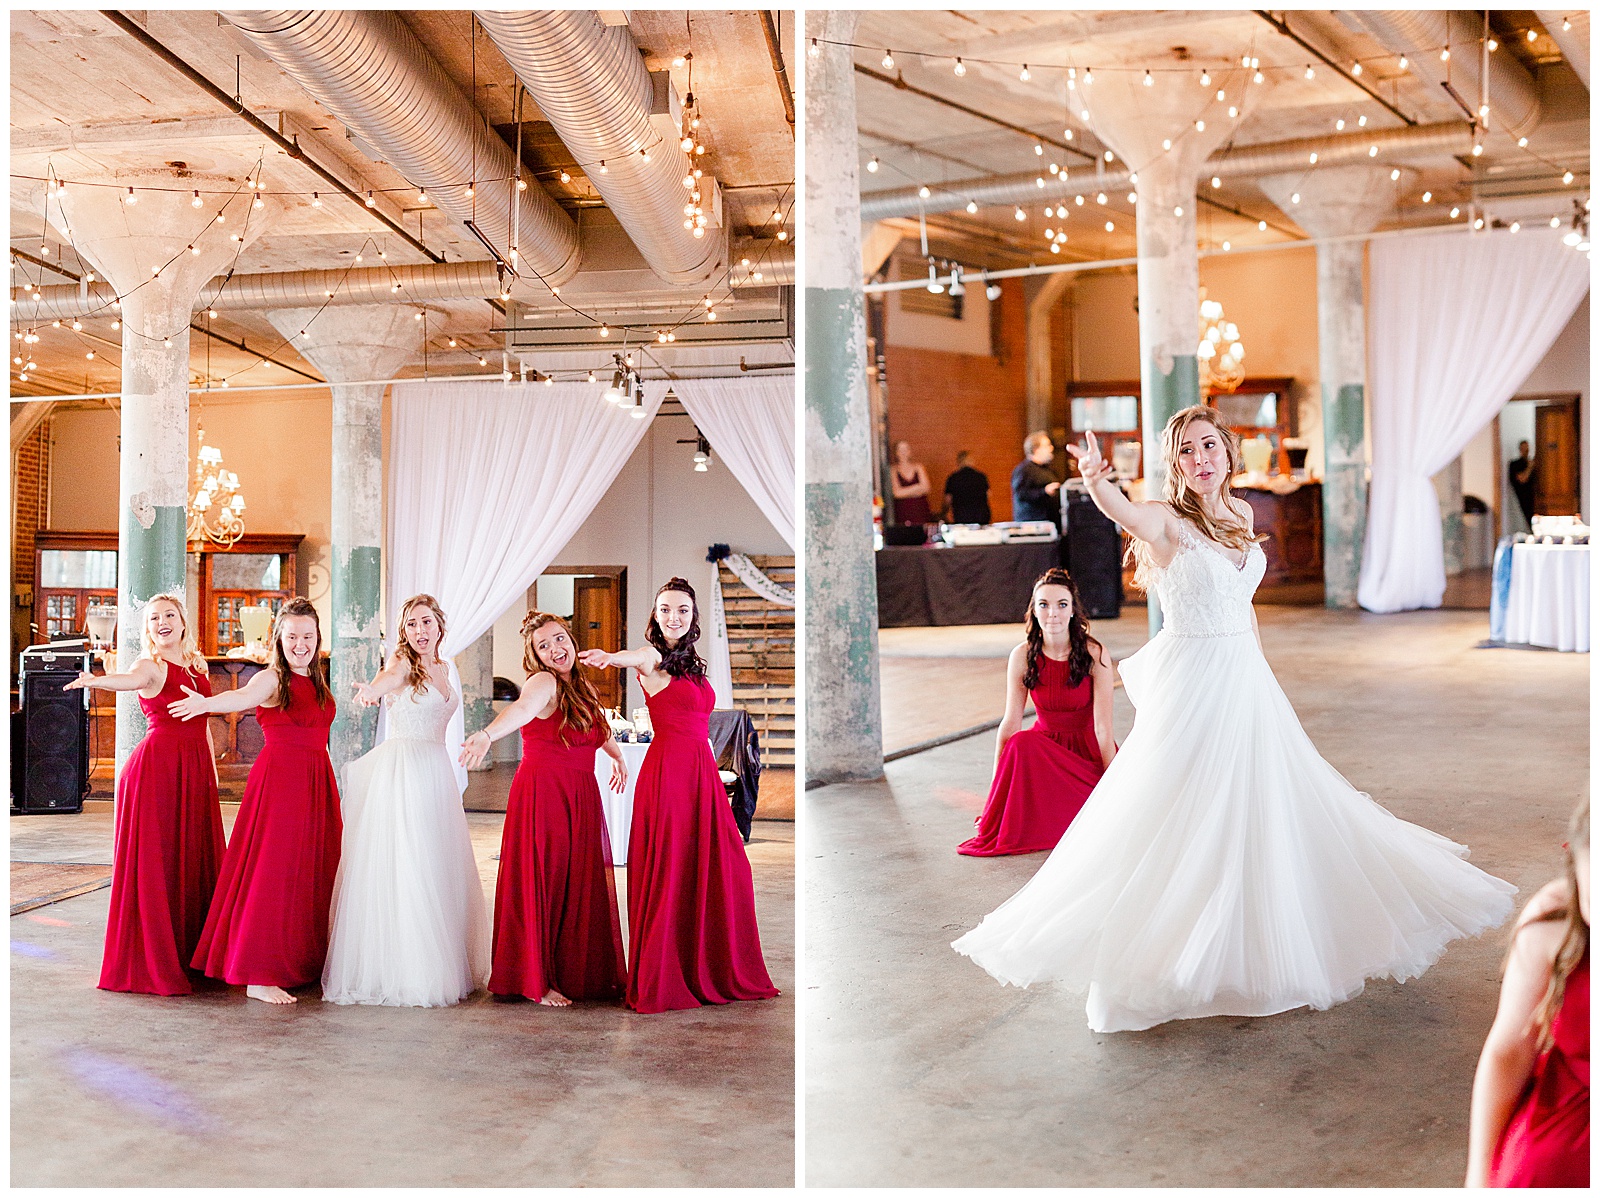 Bride Surprises Groom with Bridesmaid Dance at Rustic Airy Indoor Wedding Venue with fairy lights - Red-Themed Bridesmaid Dress Ideas from Elegant Modern Summer Wedding in Charlotte, NC | check out the full wedding at KevynDixonPhoto.com